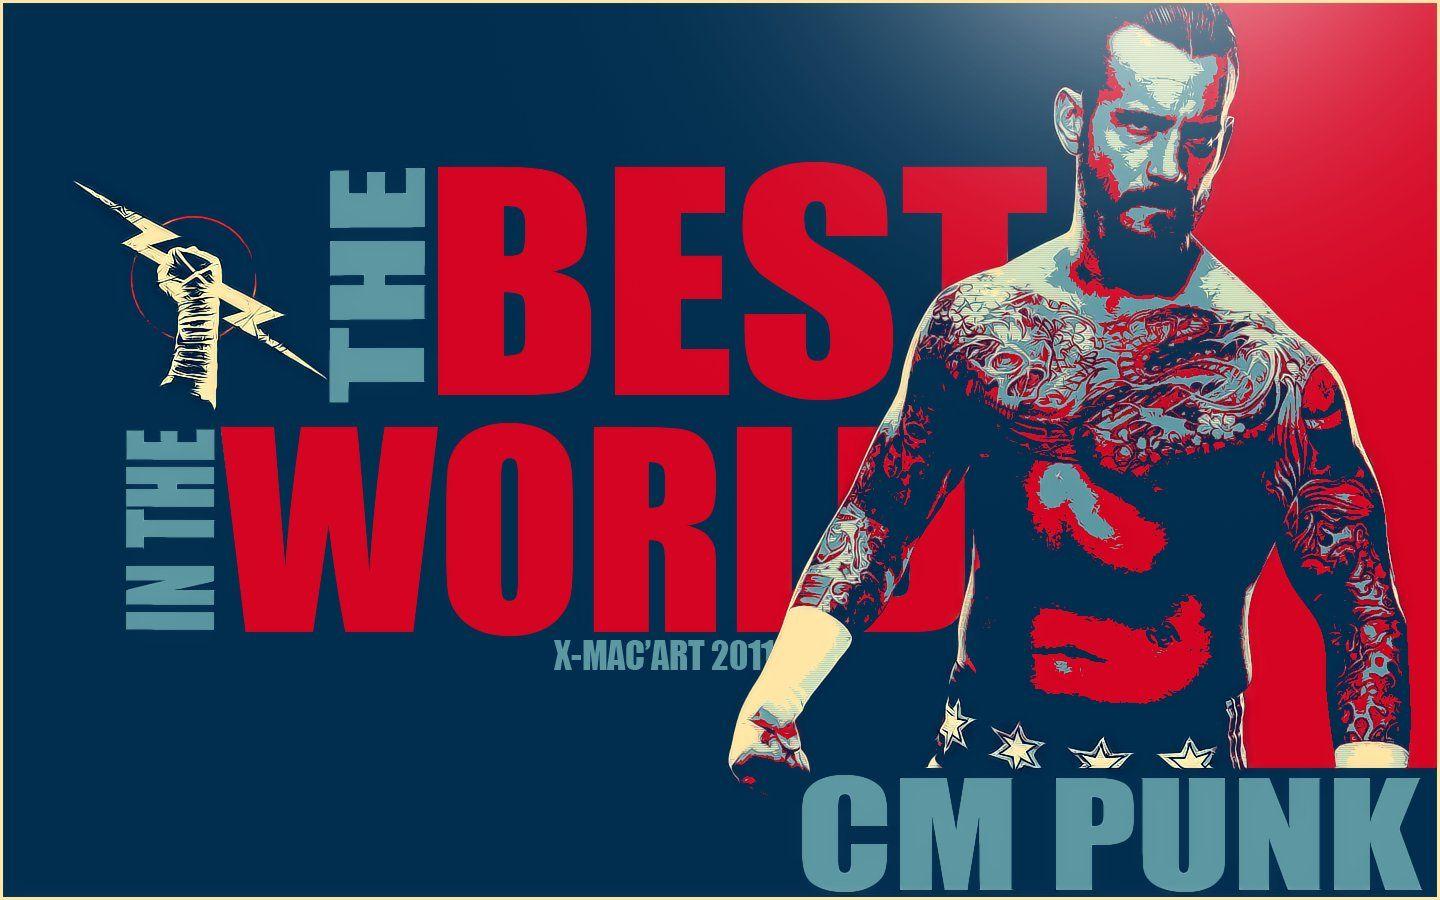 CM Punk Wallpaper and Background Imagex900